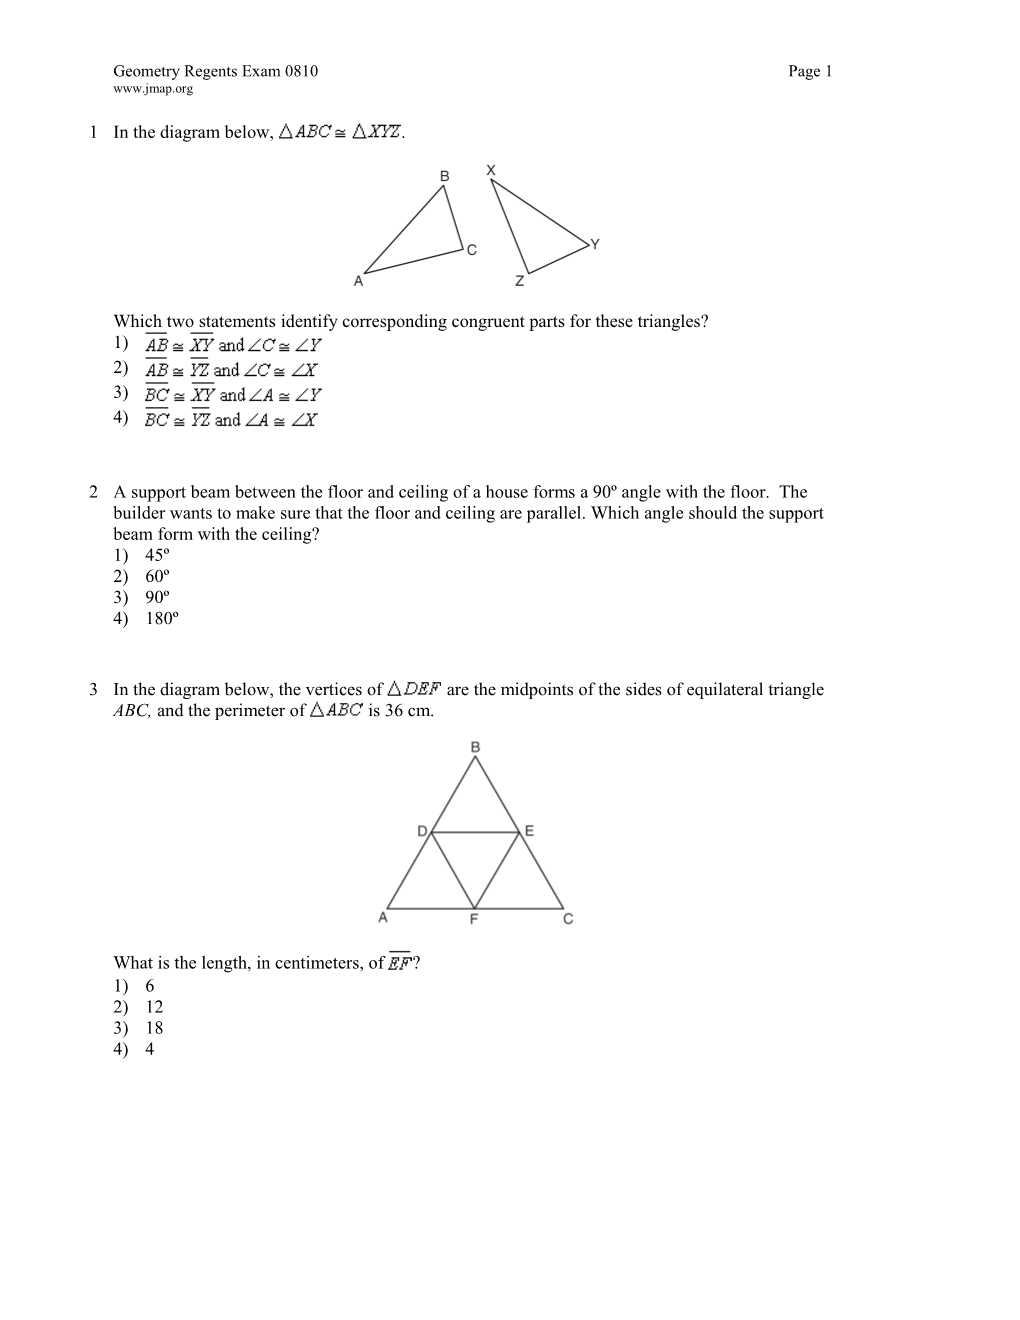 Which Two Statements Identify Corresponding Congruent Parts for These Triangles?